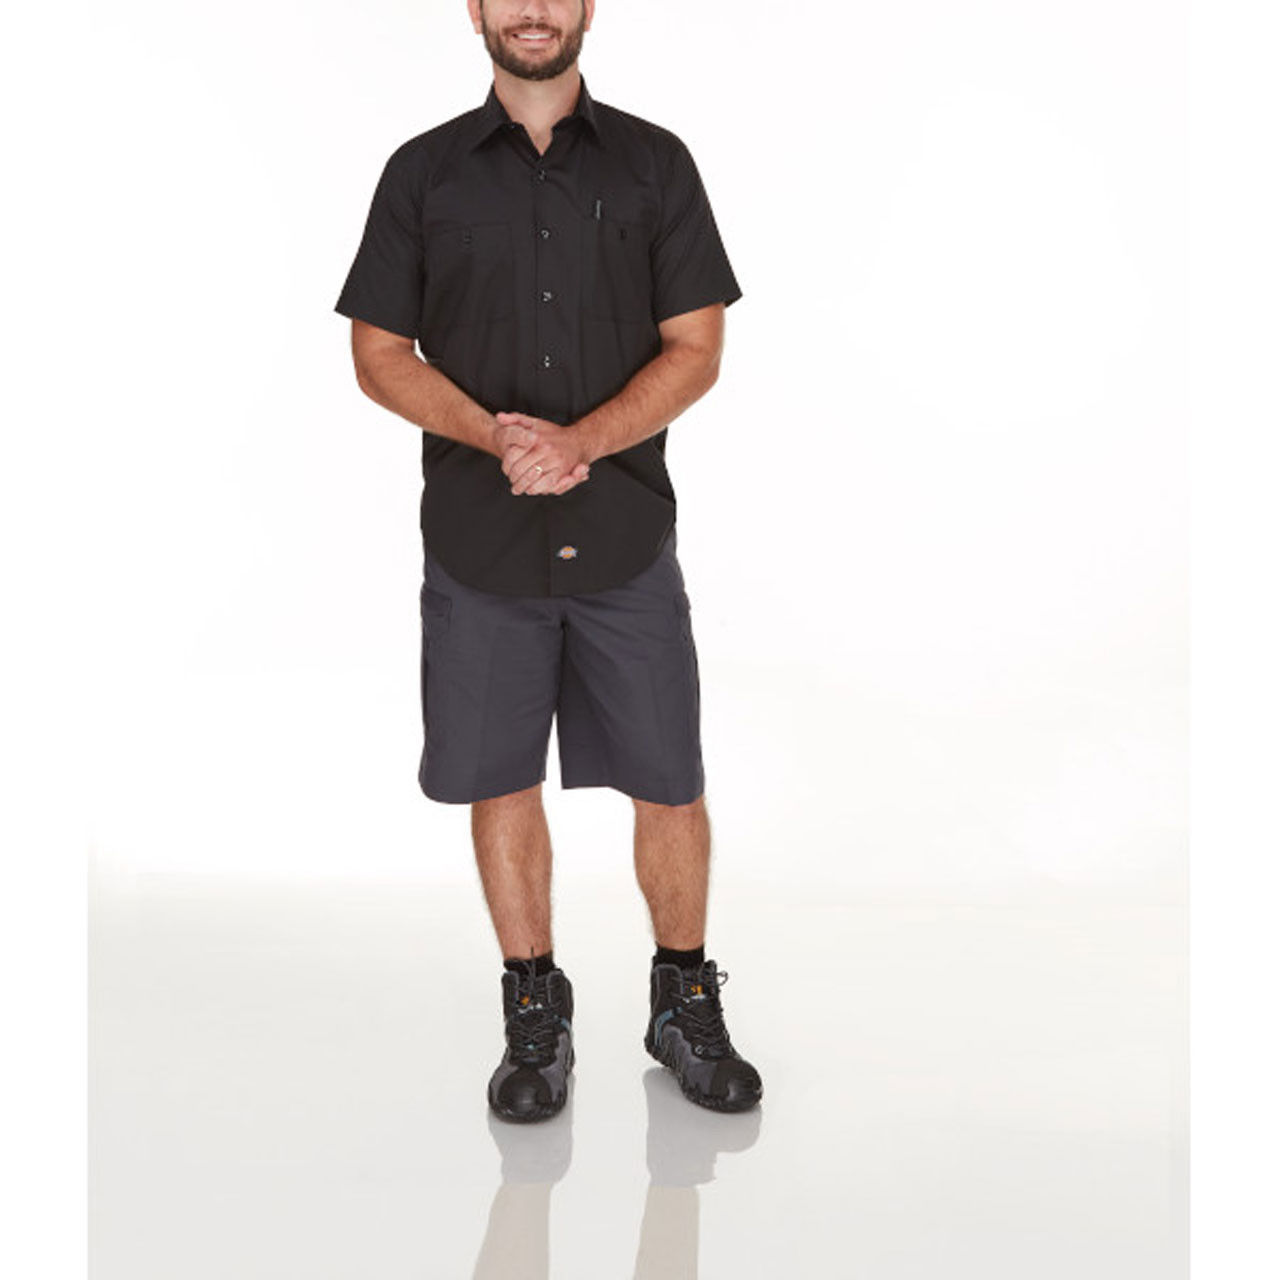 From which location are the Dickies LS51 cooling work shirts shipped?